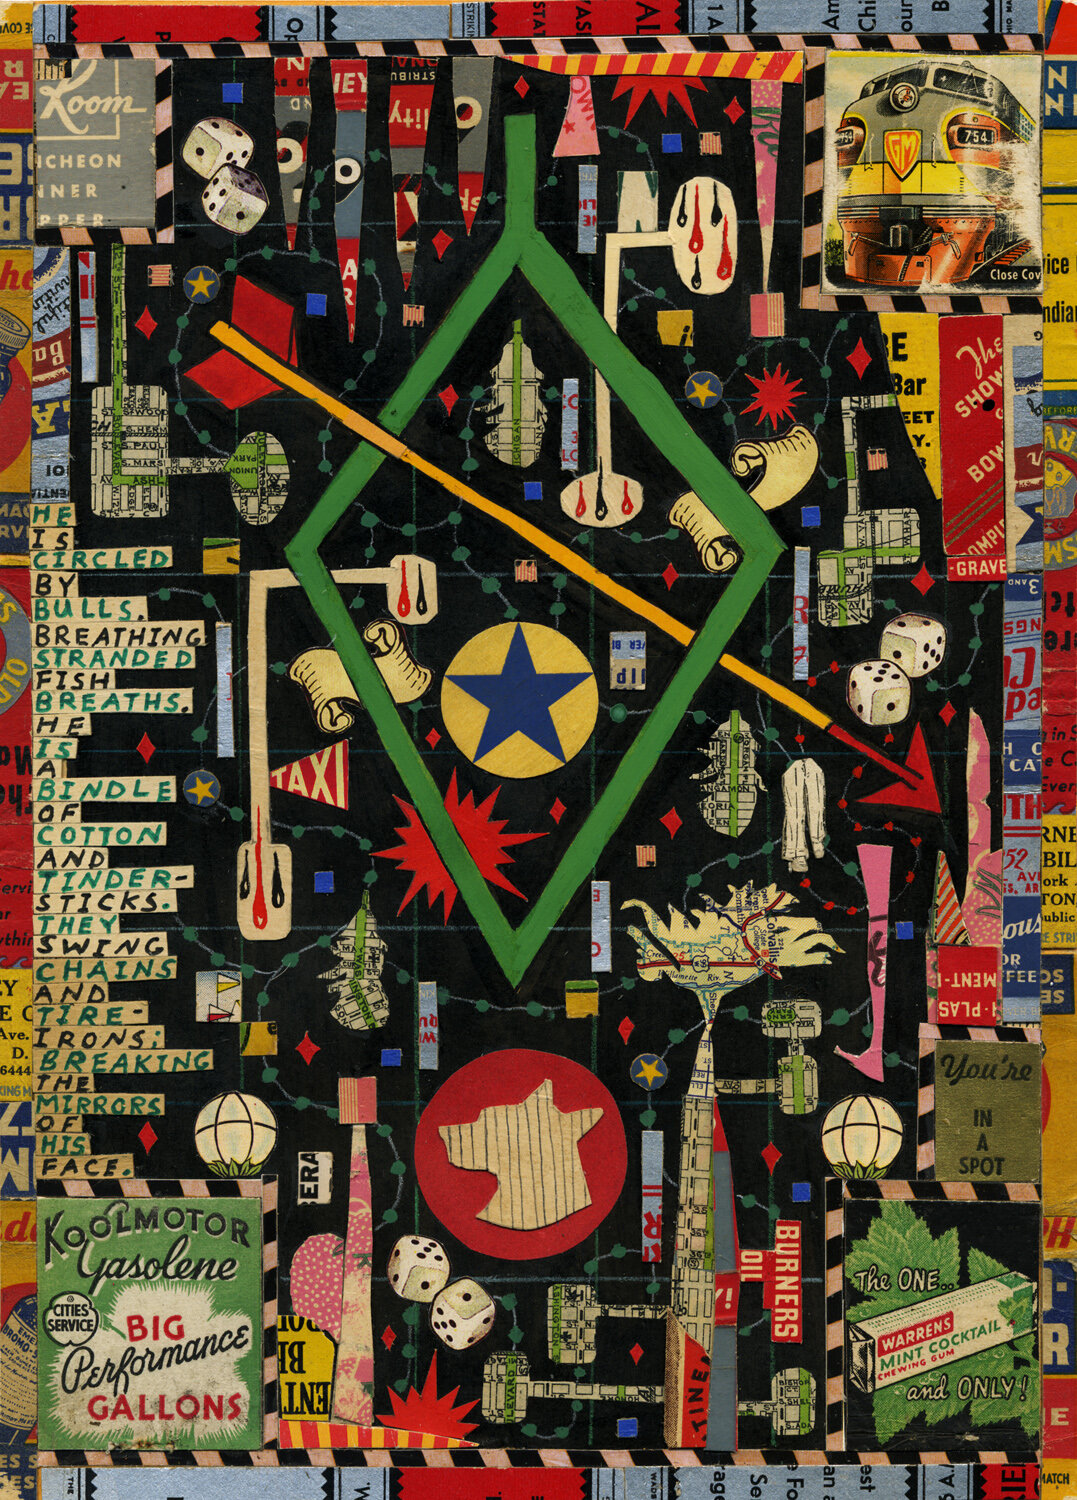  Tony Fitzpatrick,  The Last Ride,  2009, Drawing collage, 10.5 x 7.5 inches 